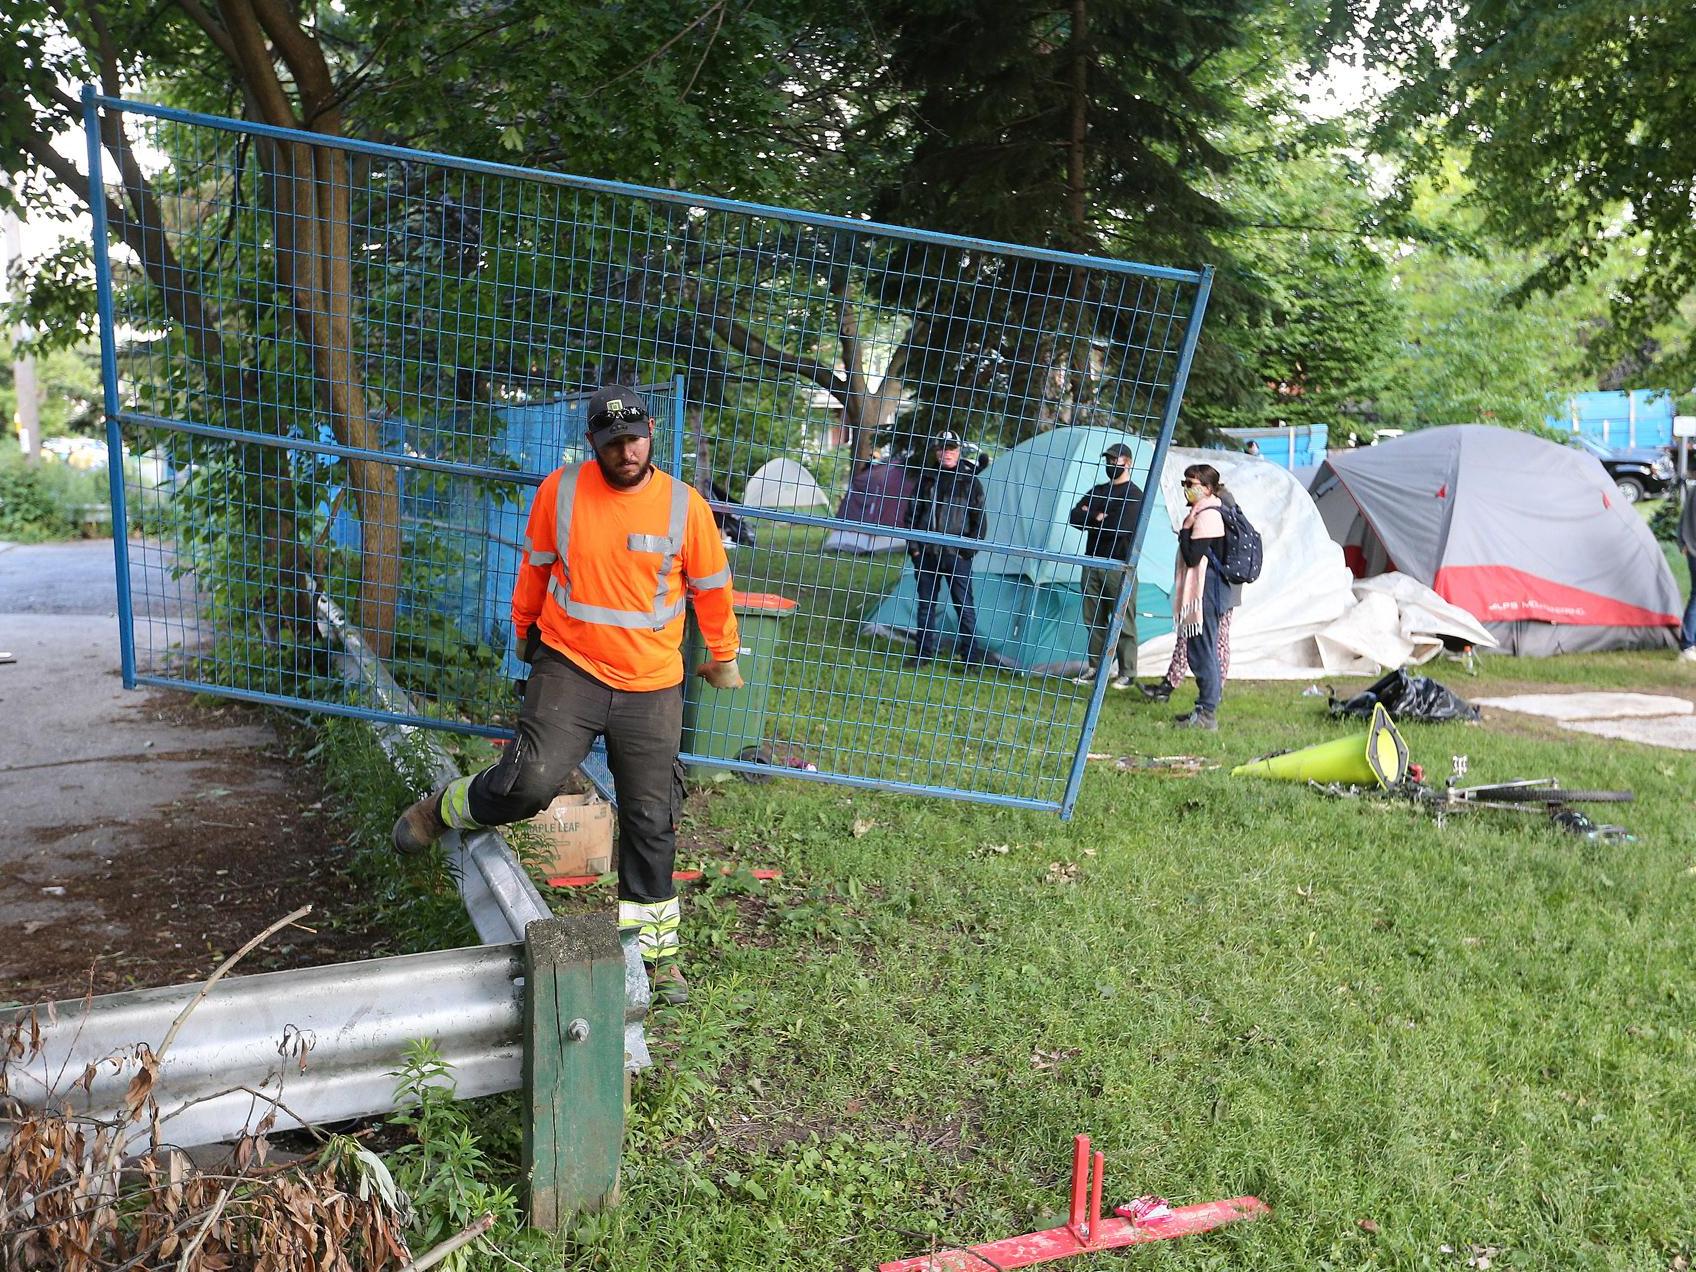 Why policing homeless encampments needs to end